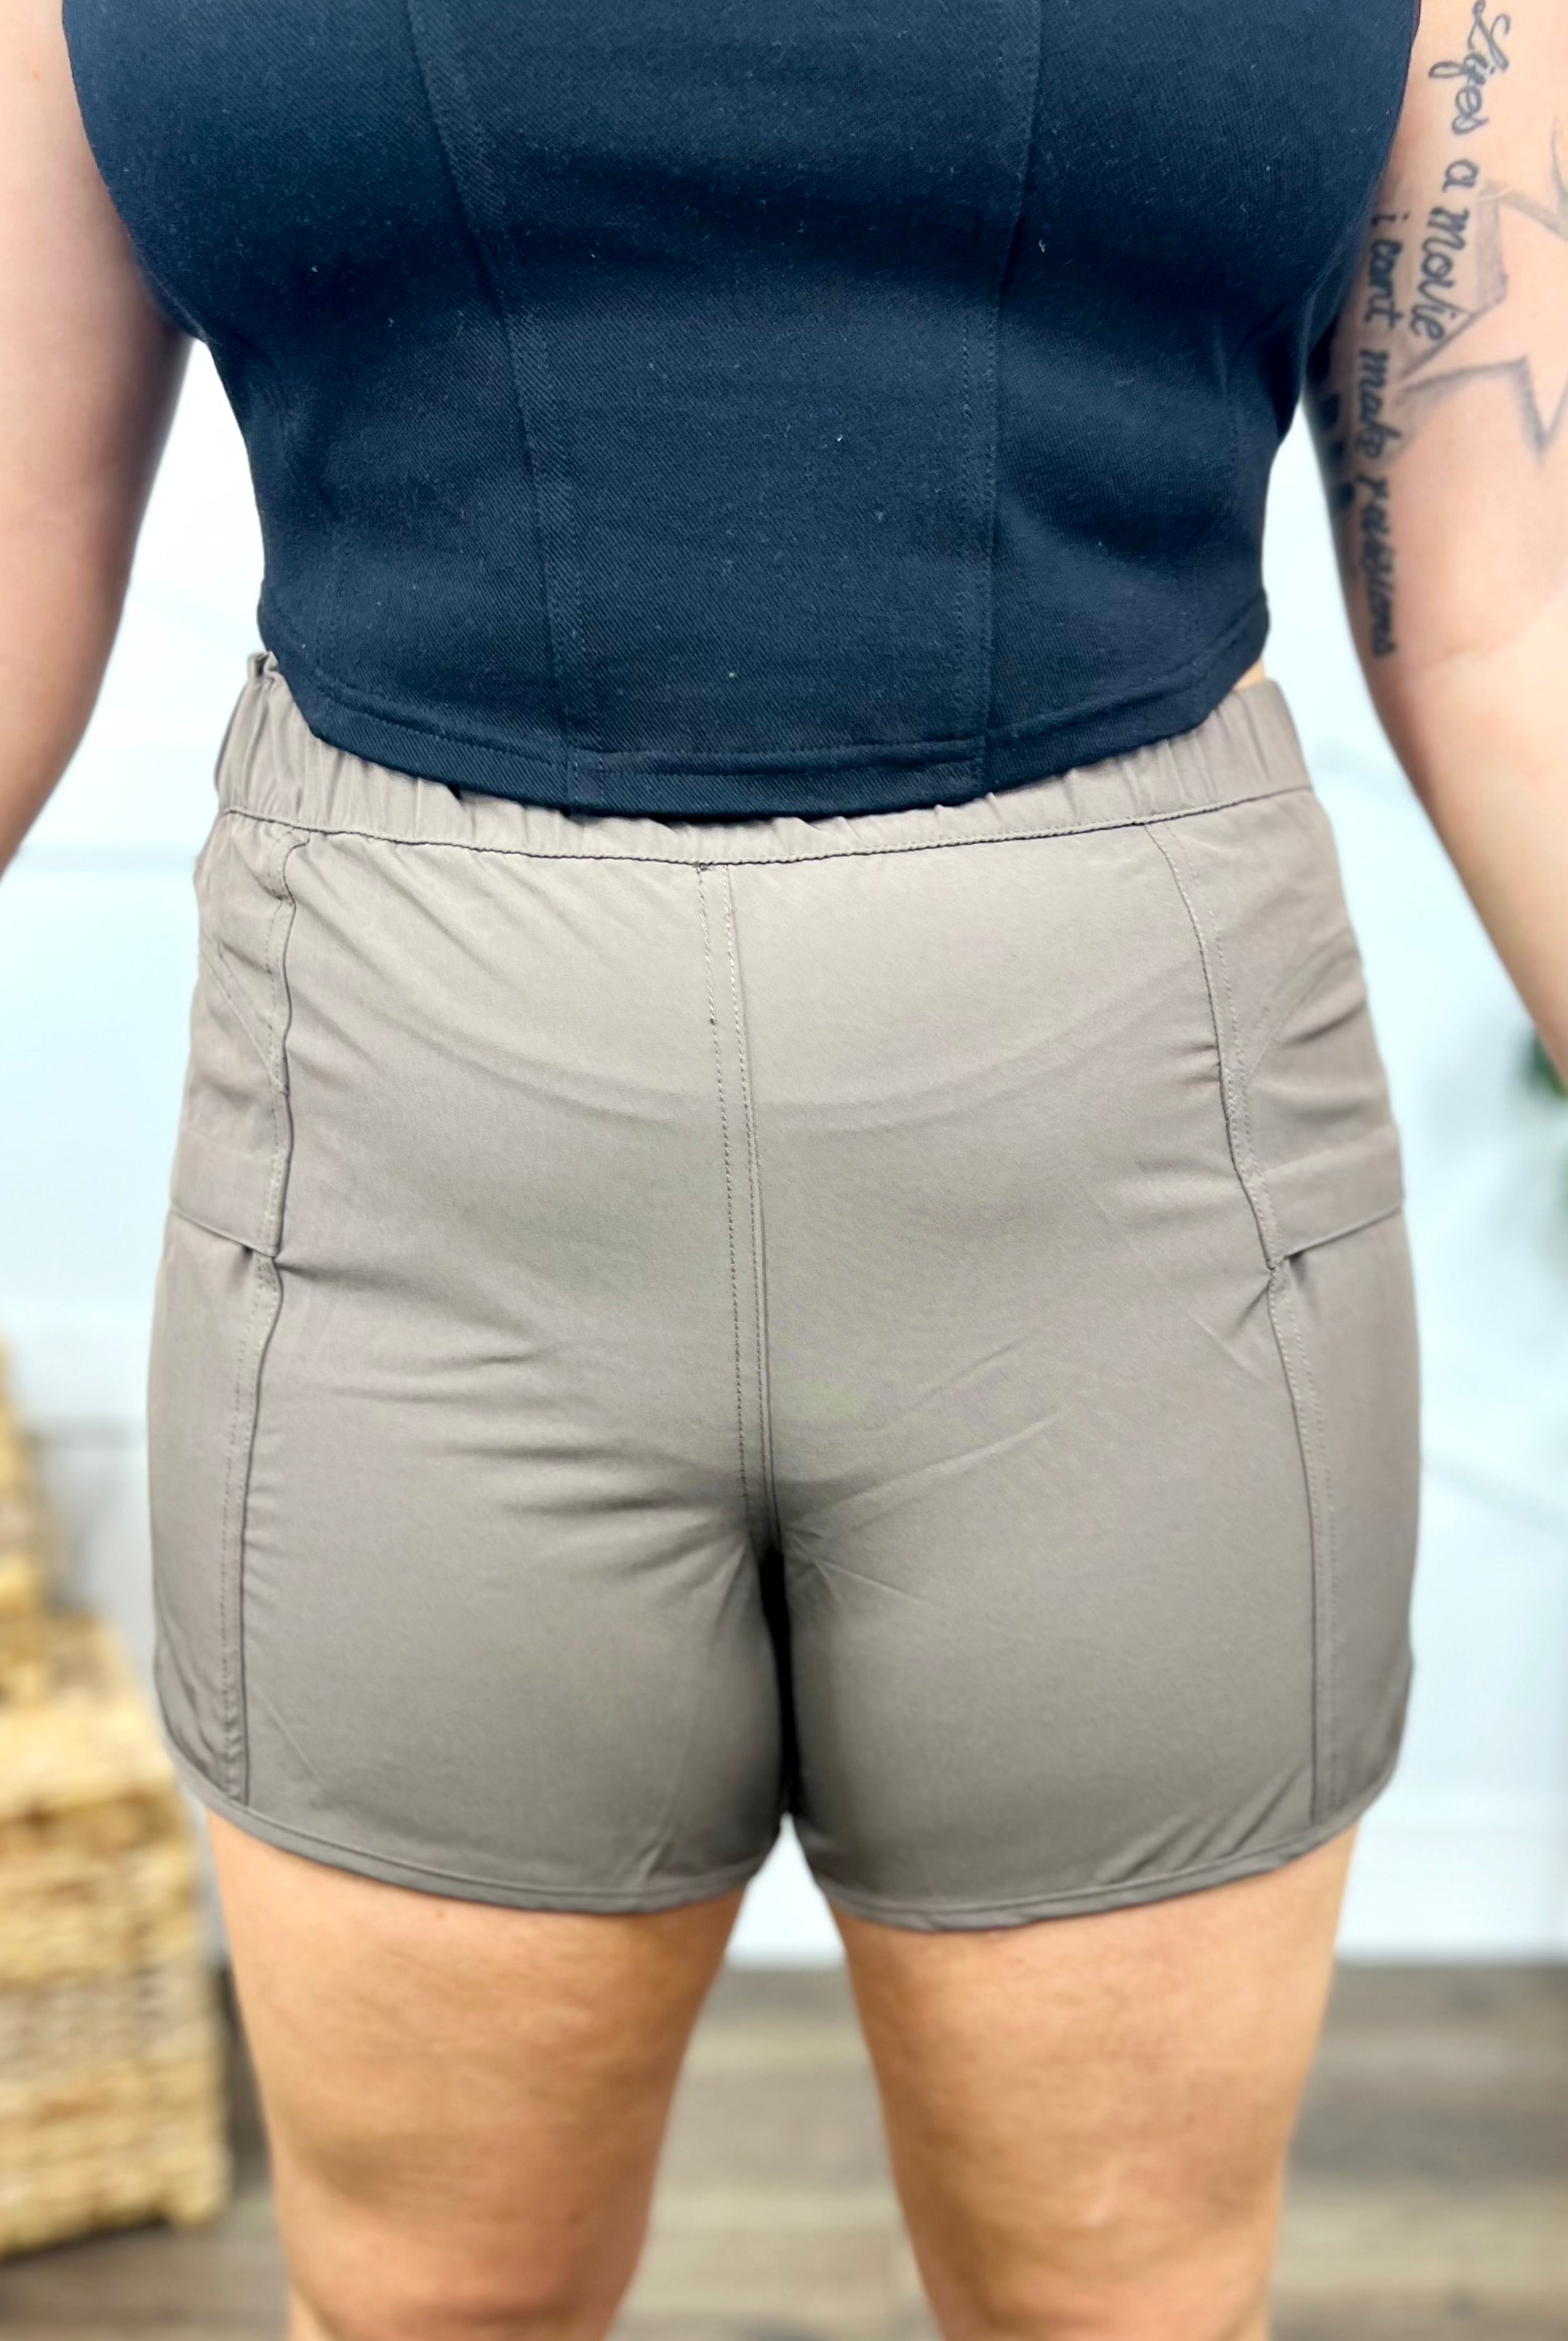 Lunar Hiking Shorts-160 shorts-Rae Mode-Heathered Boho Boutique, Women's Fashion and Accessories in Palmetto, FL